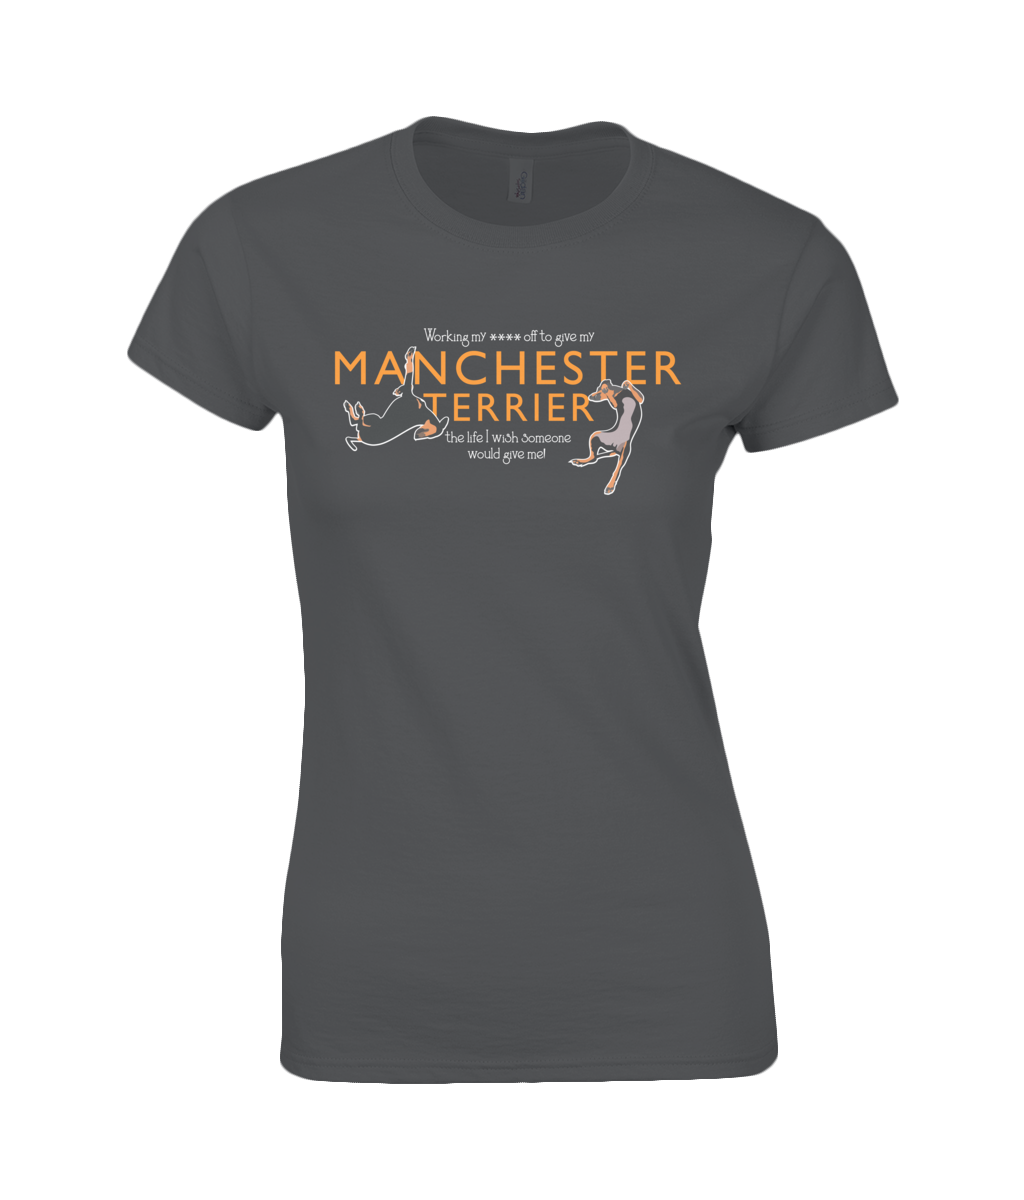 Manchester Terrier Working My **** Off! Semi Fitted Cotton T-Shirt